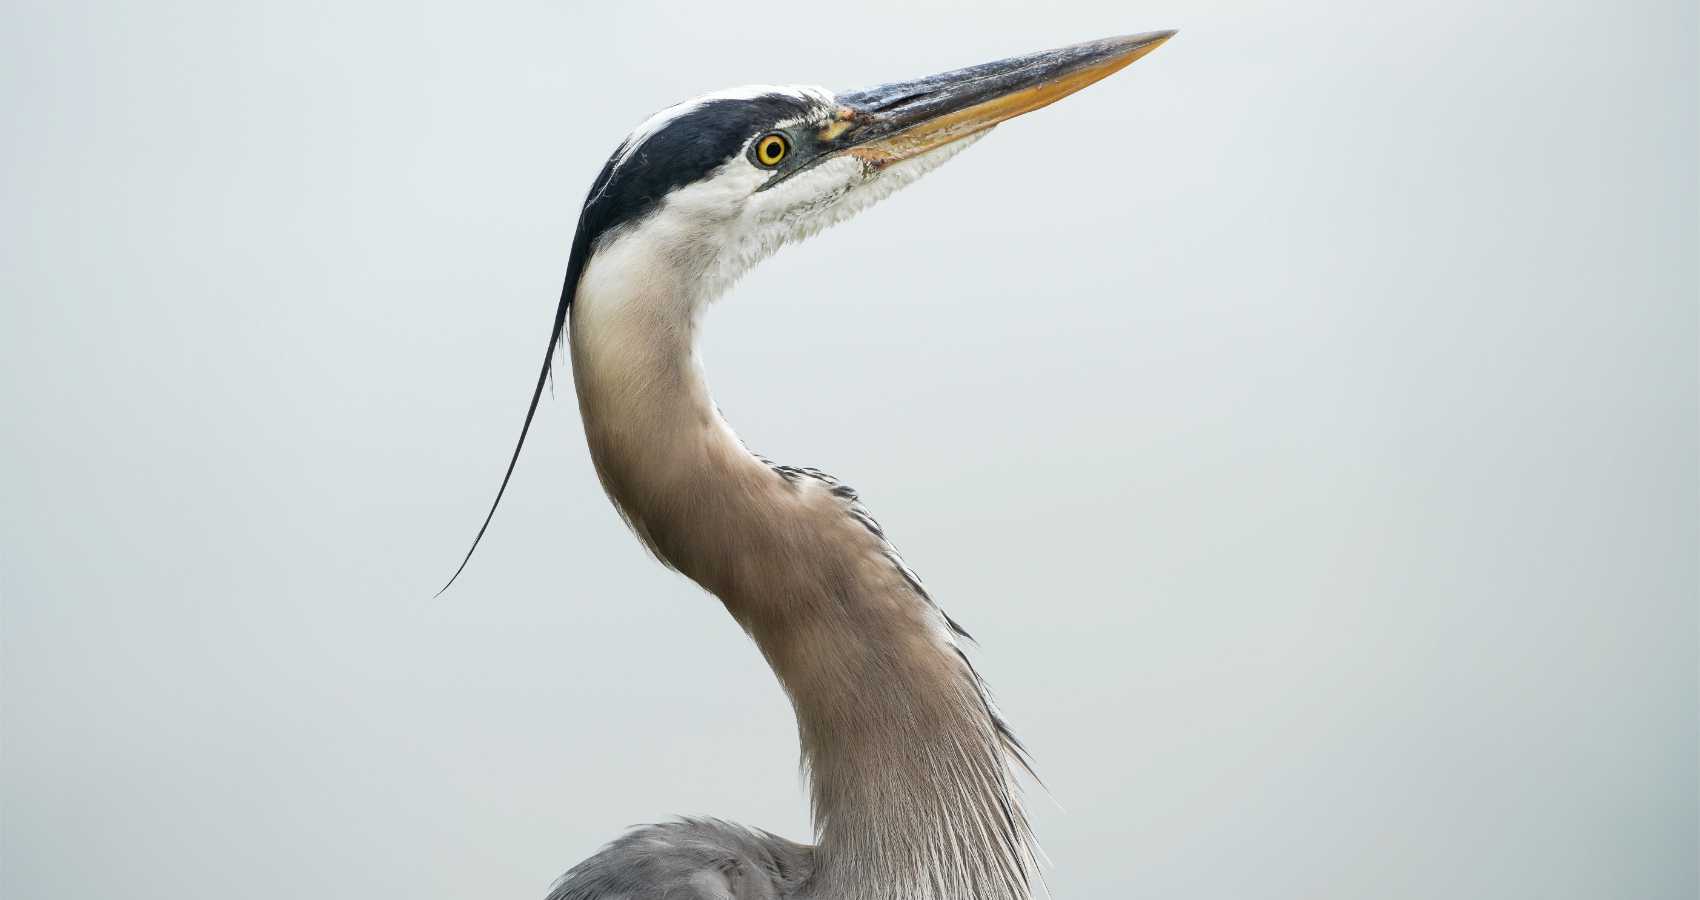 The Heron's Watchful Eye, poetry by Glynn Sinclare at Spillwords.com